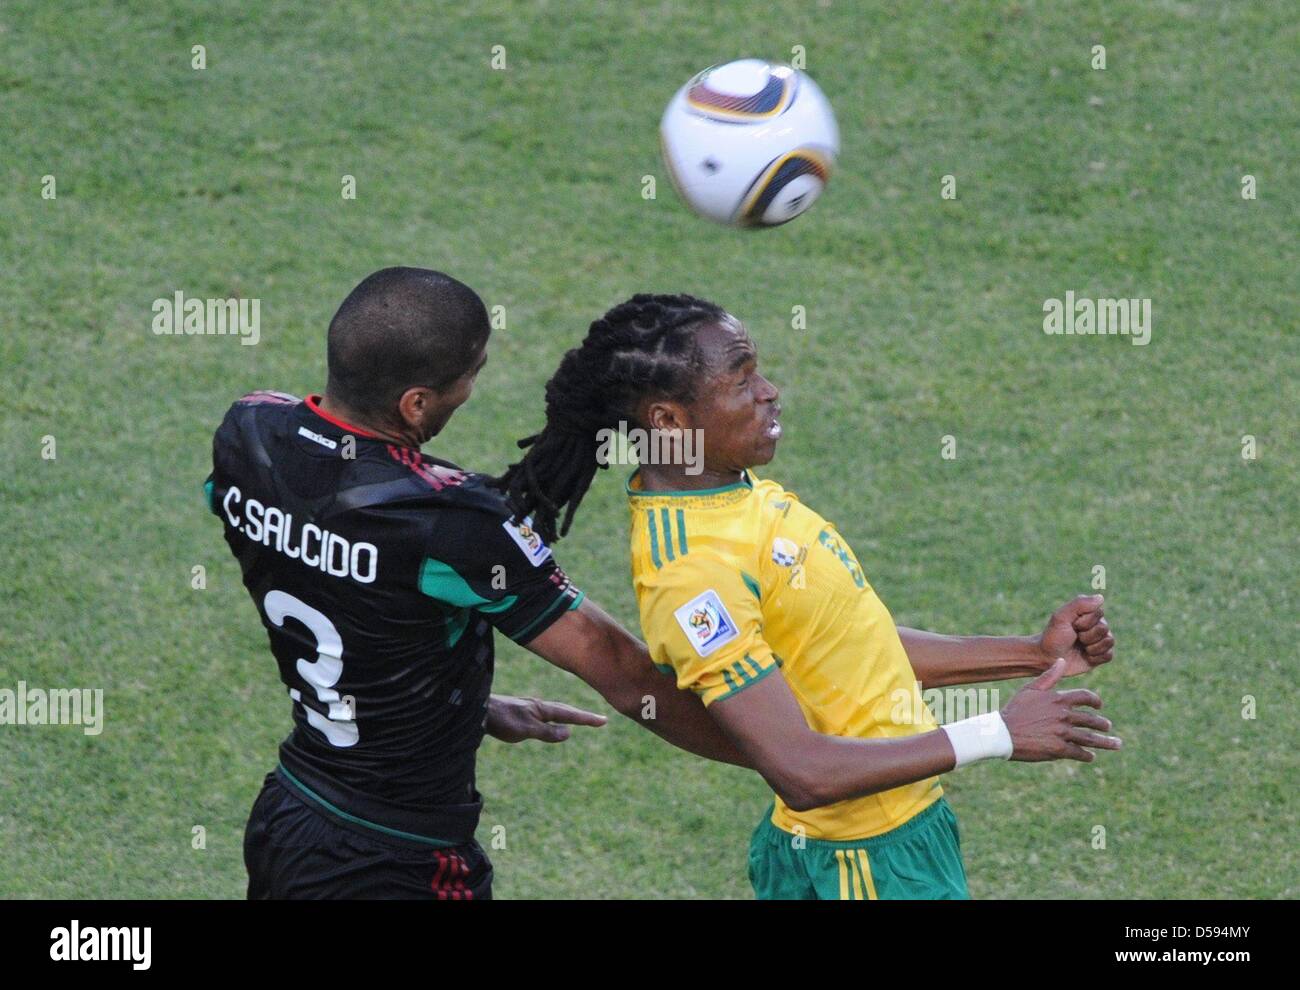 South Africa's Siphiwe Tshabalala (R) vies with Mexico's Carlos Salcido during the opening match between South Africa and Mexico at the 2010 FIFA World Cup at Soccer City stadium in Johannesburg, South Africa 11 June 2010. Photo: Marcus Brandt dpa - Please refer to http://dpaq.de/FIFA-WM2010-TC  +++(c) dpa - Bildfunk+++ Stock Photo